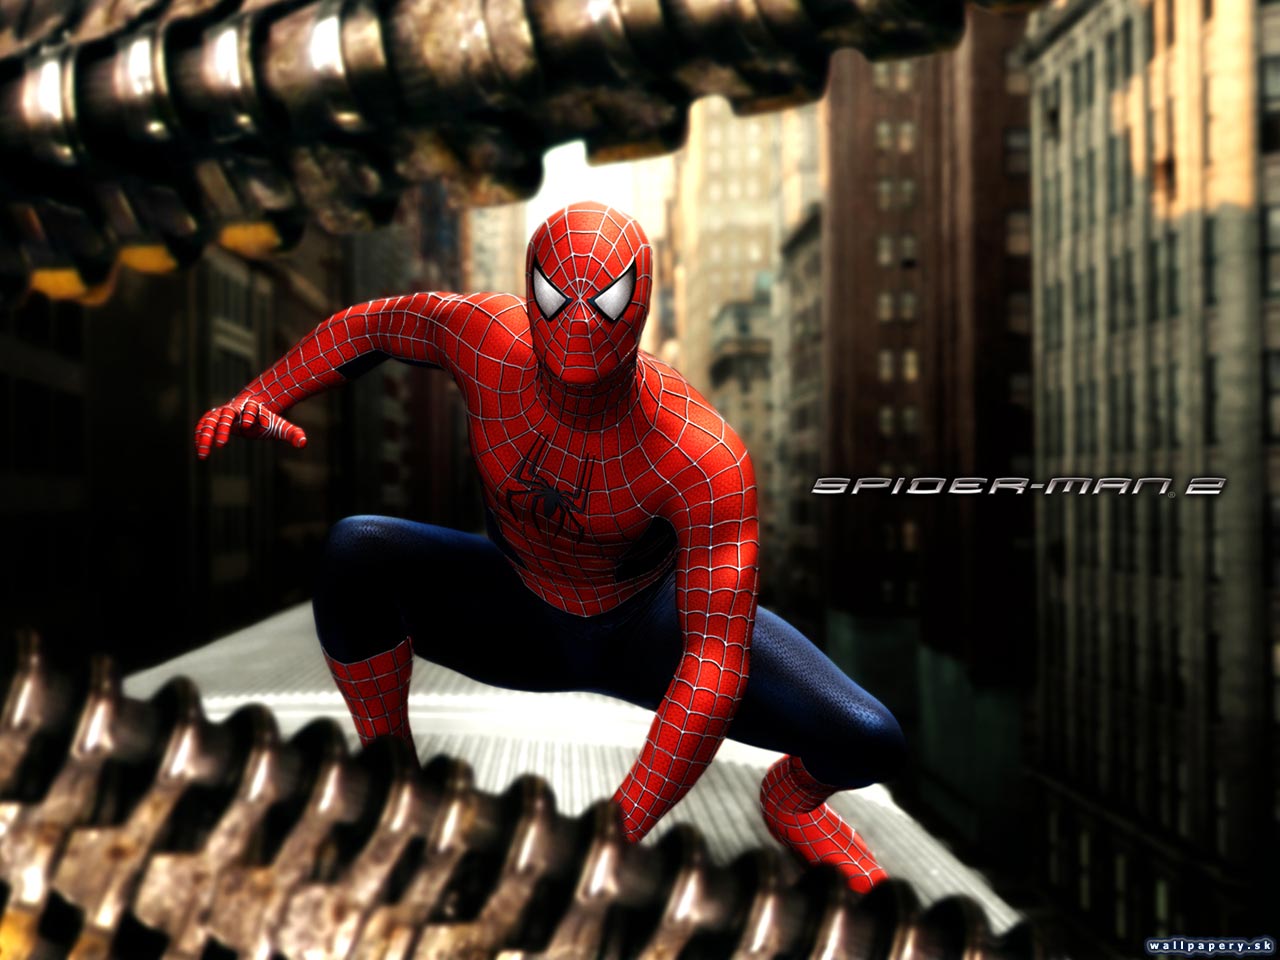 Spider-Man 2: The Game - wallpaper 11